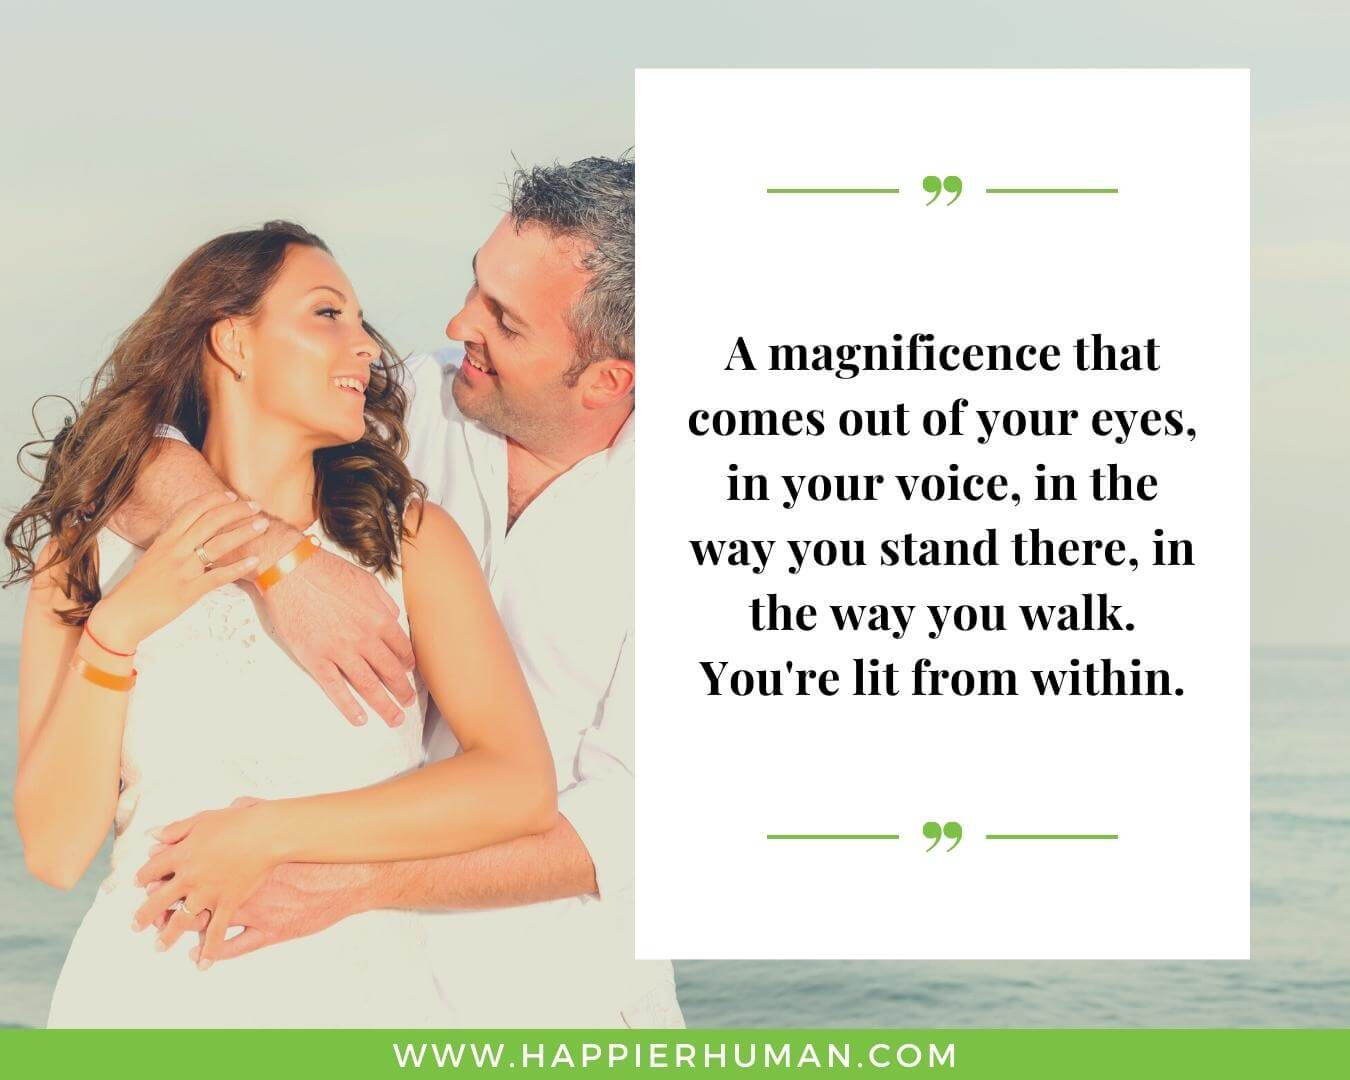 Wife Love Quotes - “A magnificence that comes out of your eyes, in your voice, in the way you stand there, in the way you walk. You're lit from within.”